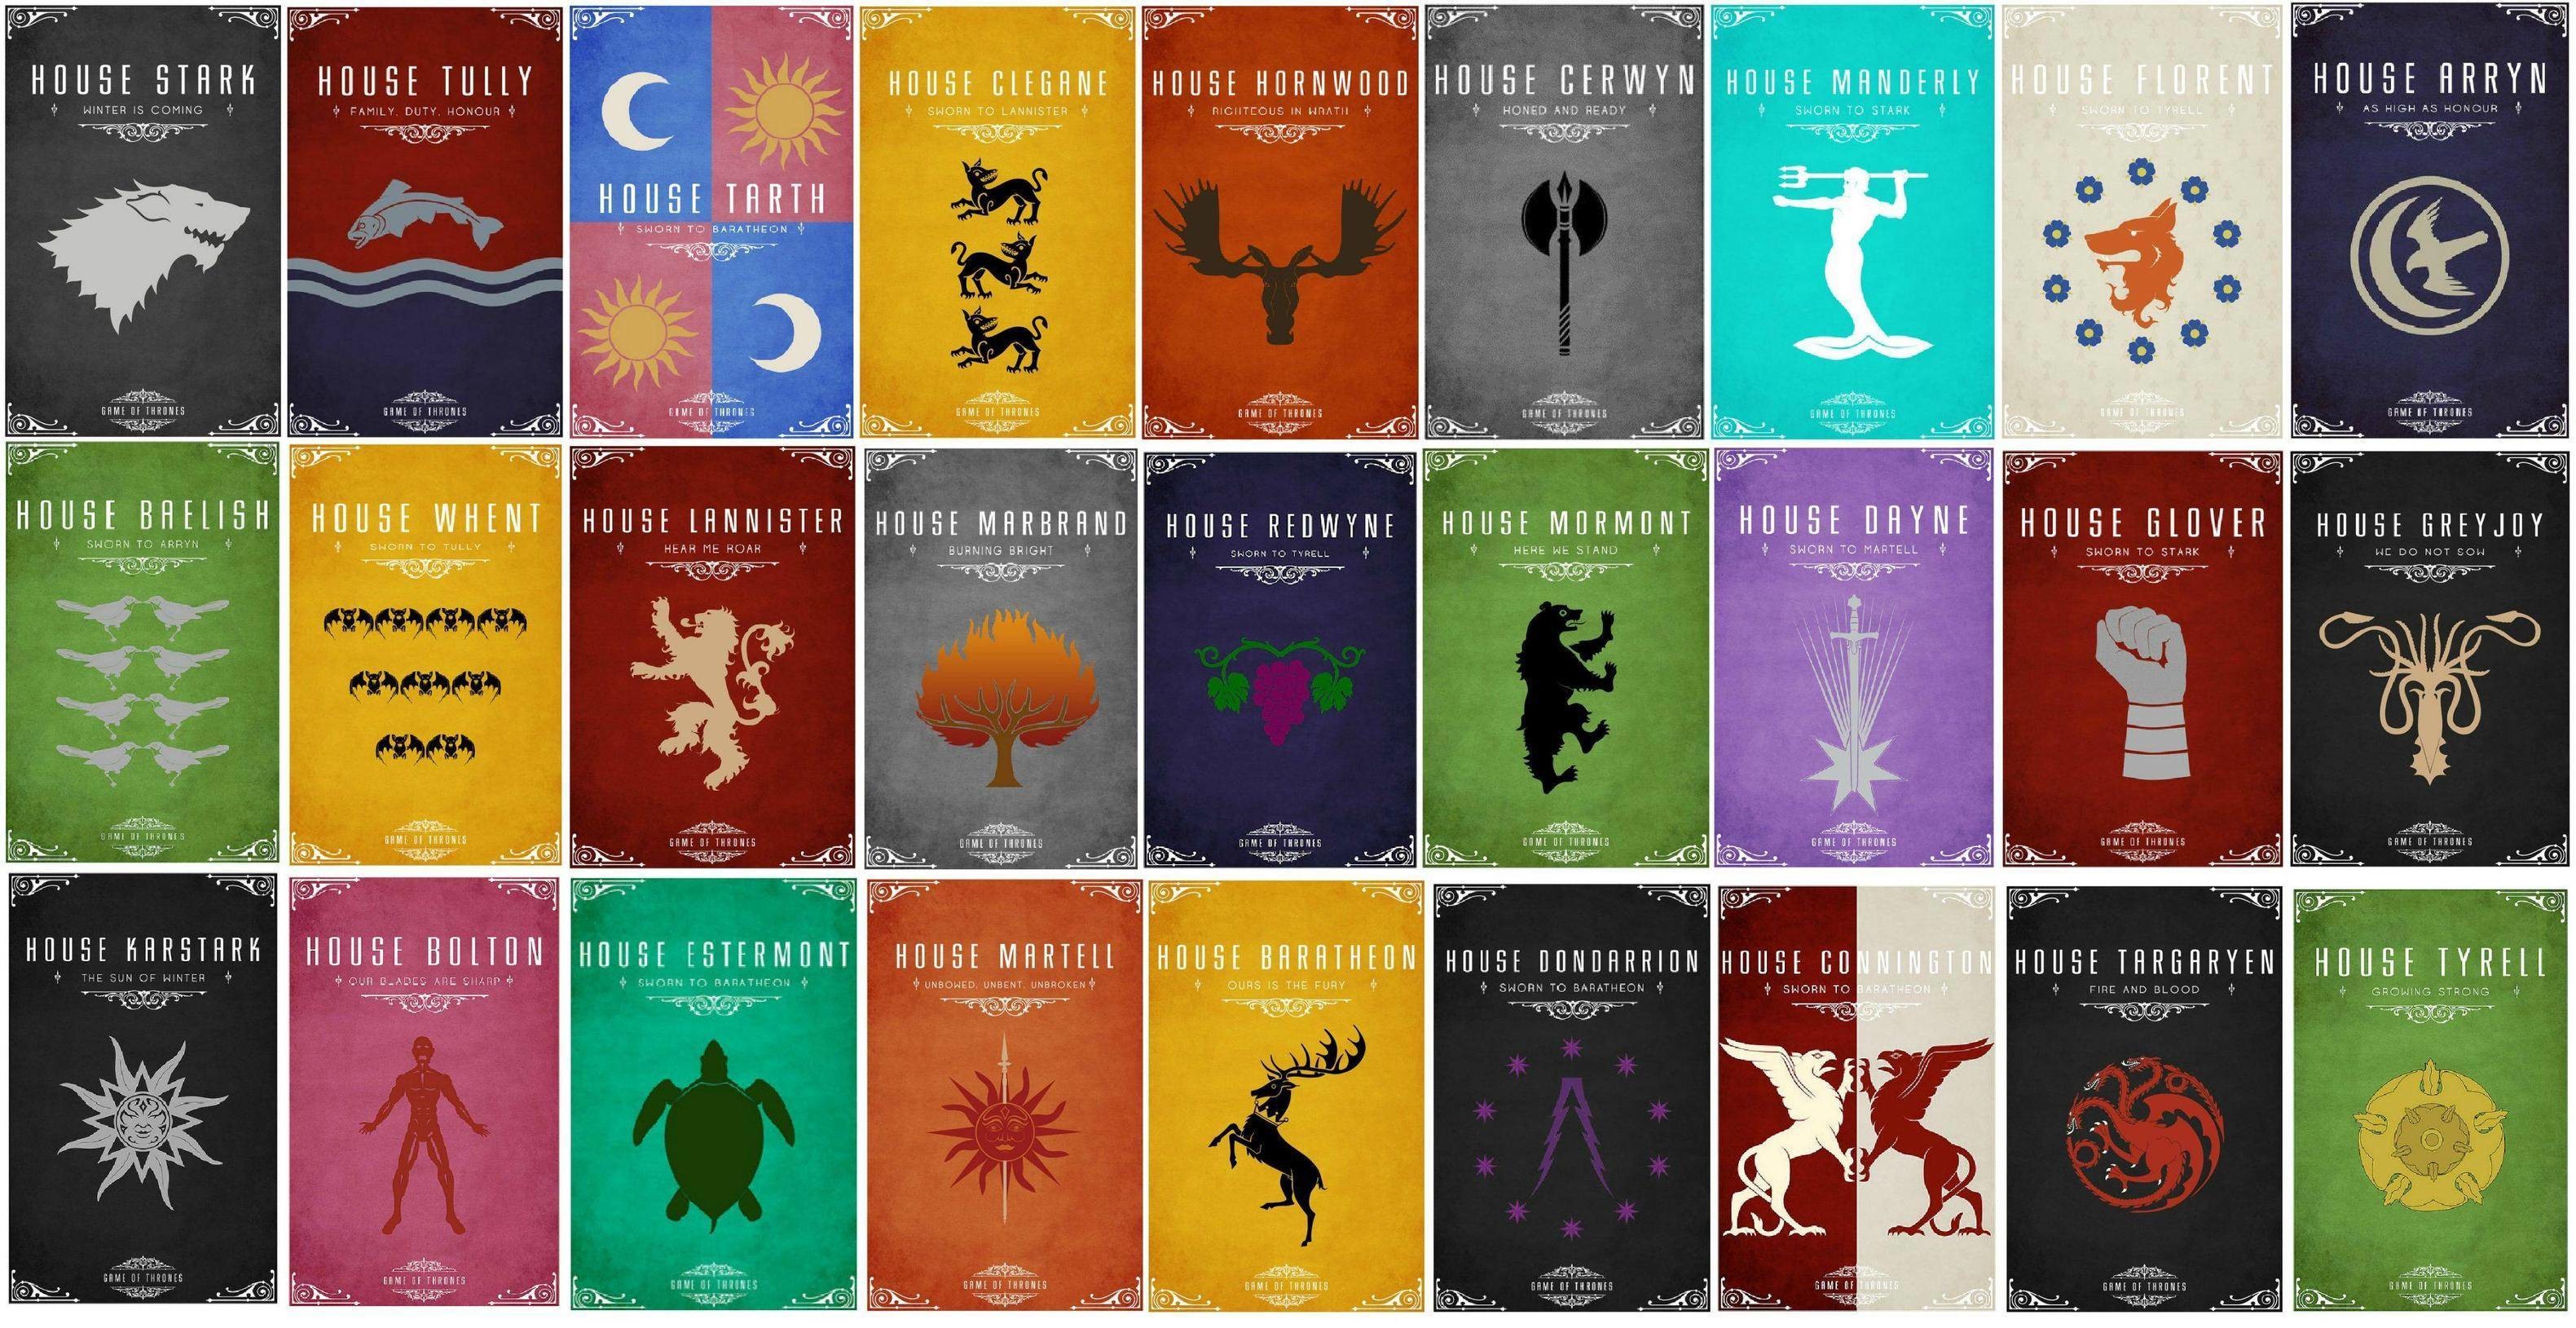 3161x1629 (No Spoilers) I thought you guys might appreciate this. Wallpaper with  house sigils and words. (x-post from /r/wallpapers) ...